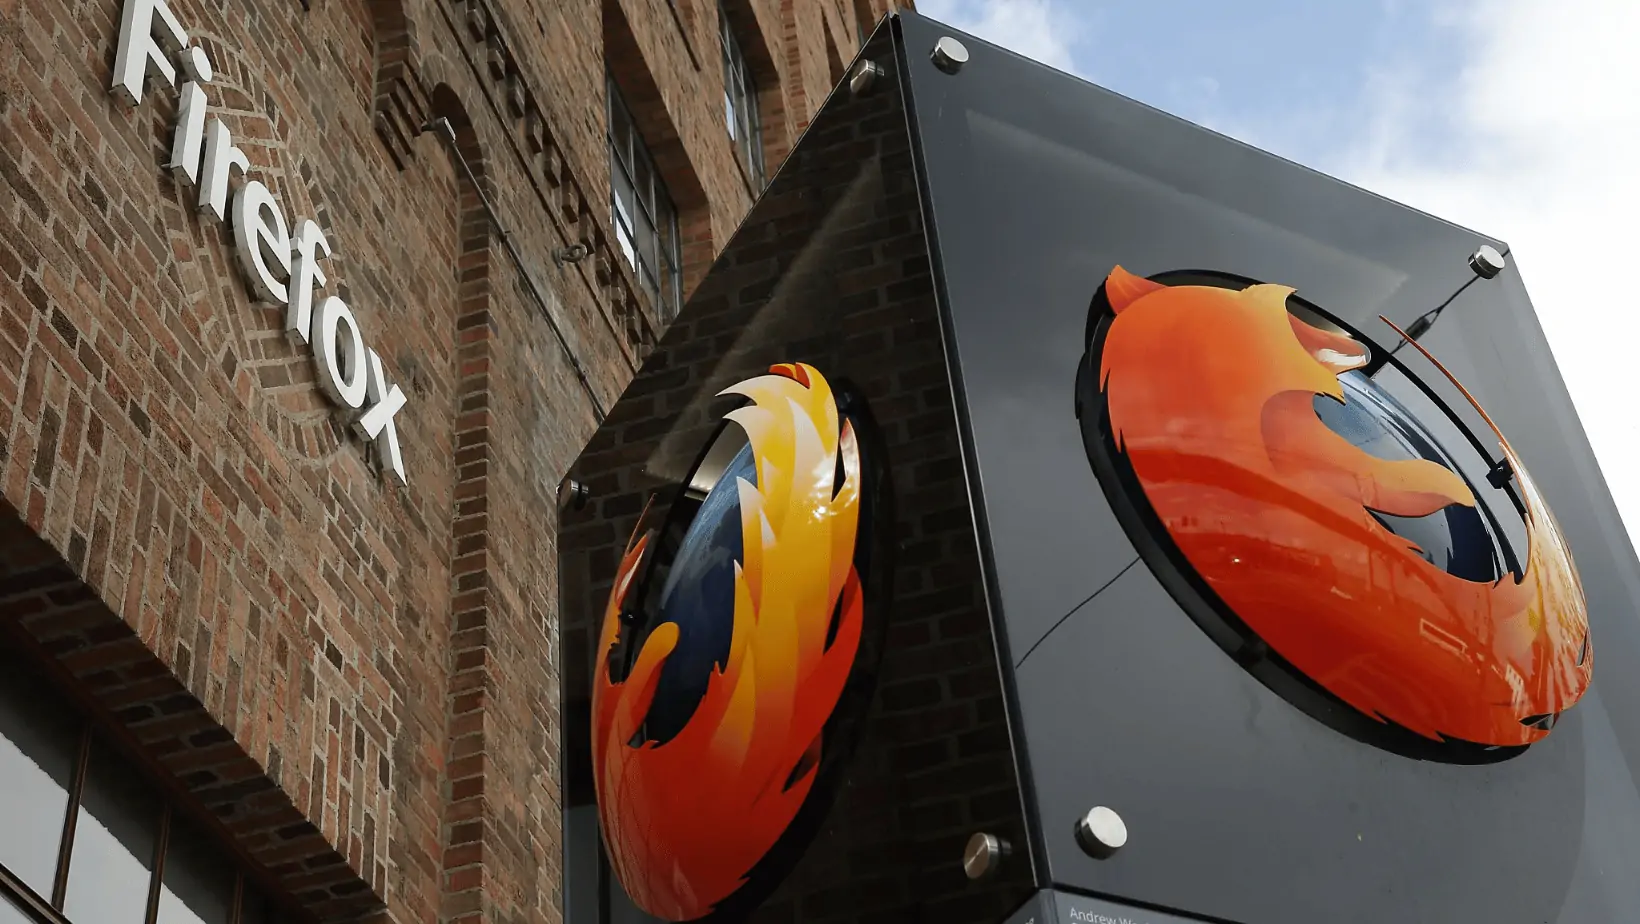 Mozilla Announces Major Product Strategy Shift, Layoffs Amidst Leadership Changes